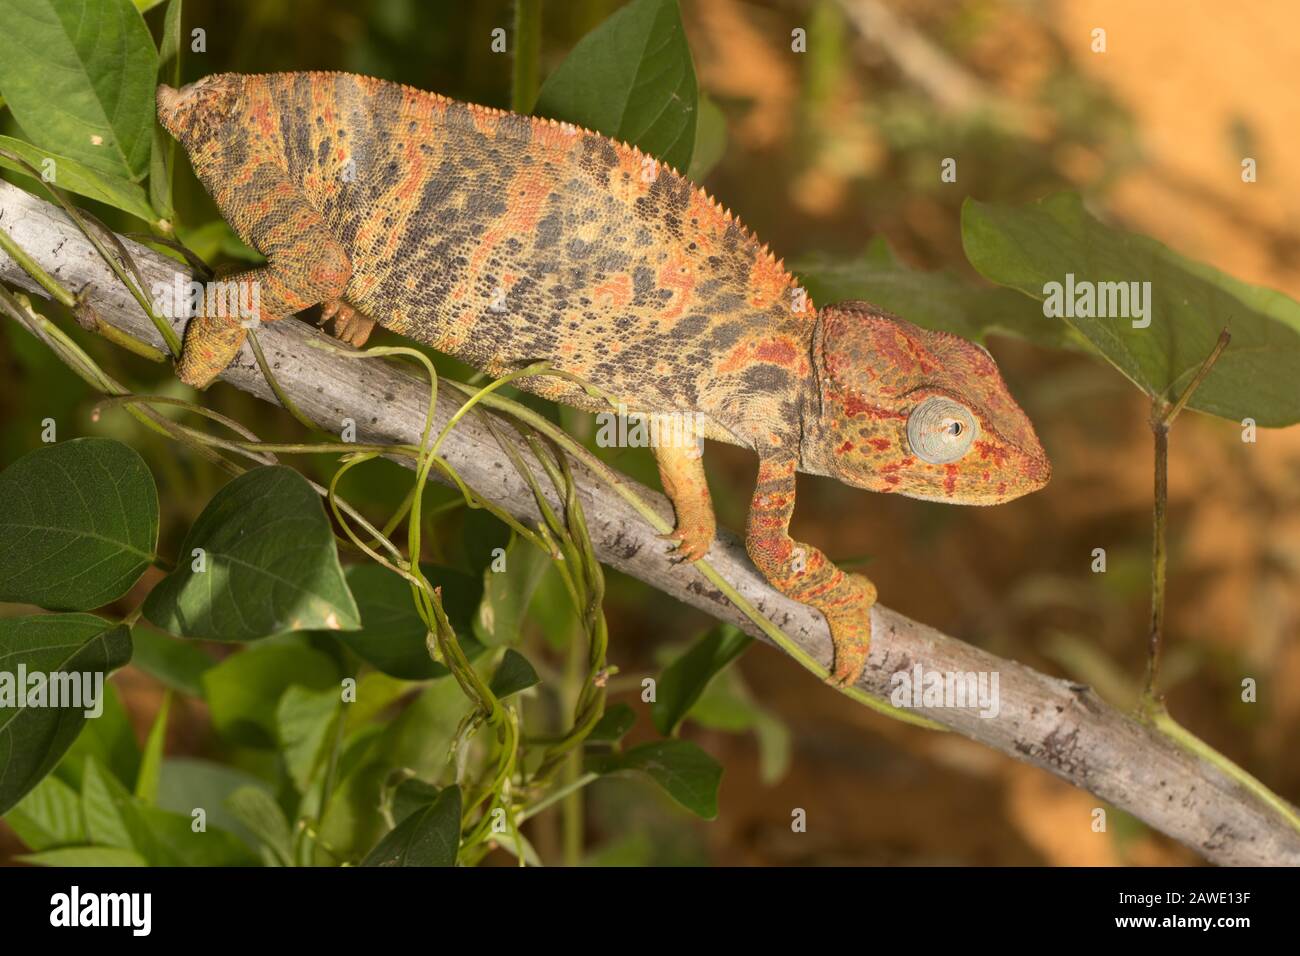 Madagascar Malagasy giant chameleon (Furcifer oustaleti), females in gestation coloration without tail, sitting on a branch, Ankaramibe, northwest Stock Photo